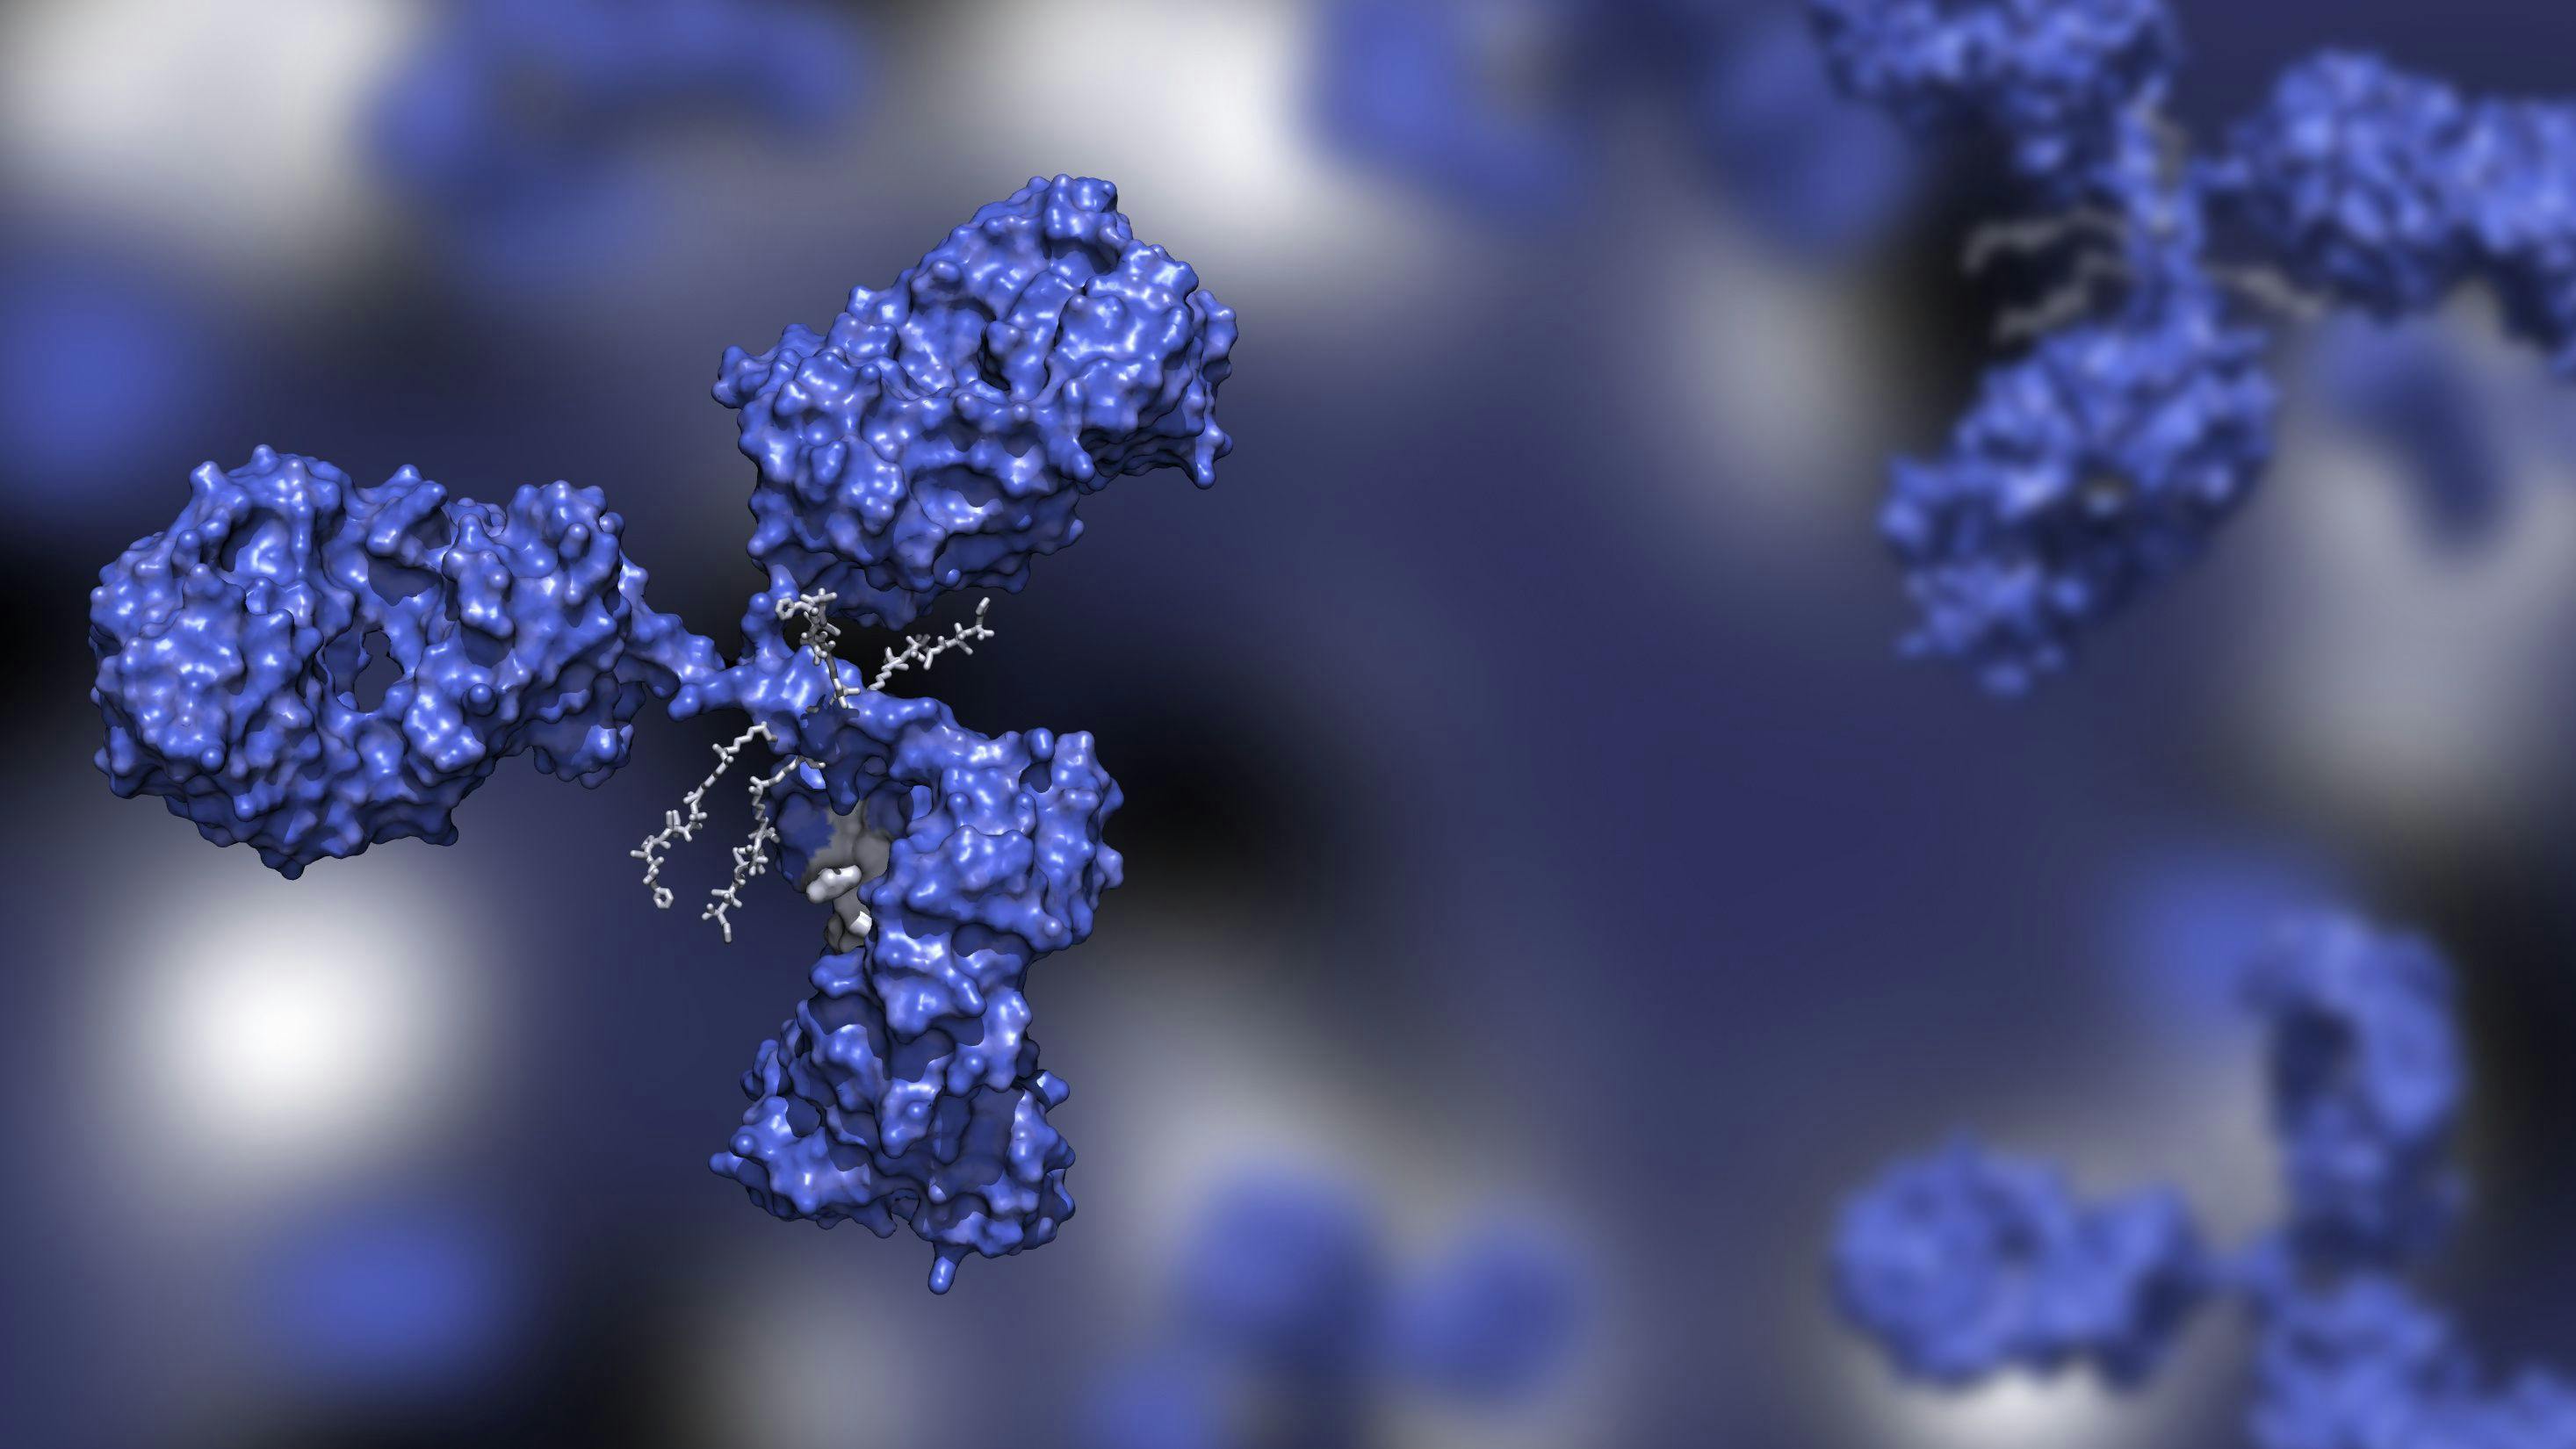 With the evolution of the therapeutic pipeline from simple monoclonal antibodies to more complex therapeutic molecules like ADCs, the challenges in monitoring post-translational modifications at the intact level have increased. Image Credit: © huenstructurebio.com - stock.adobe.com